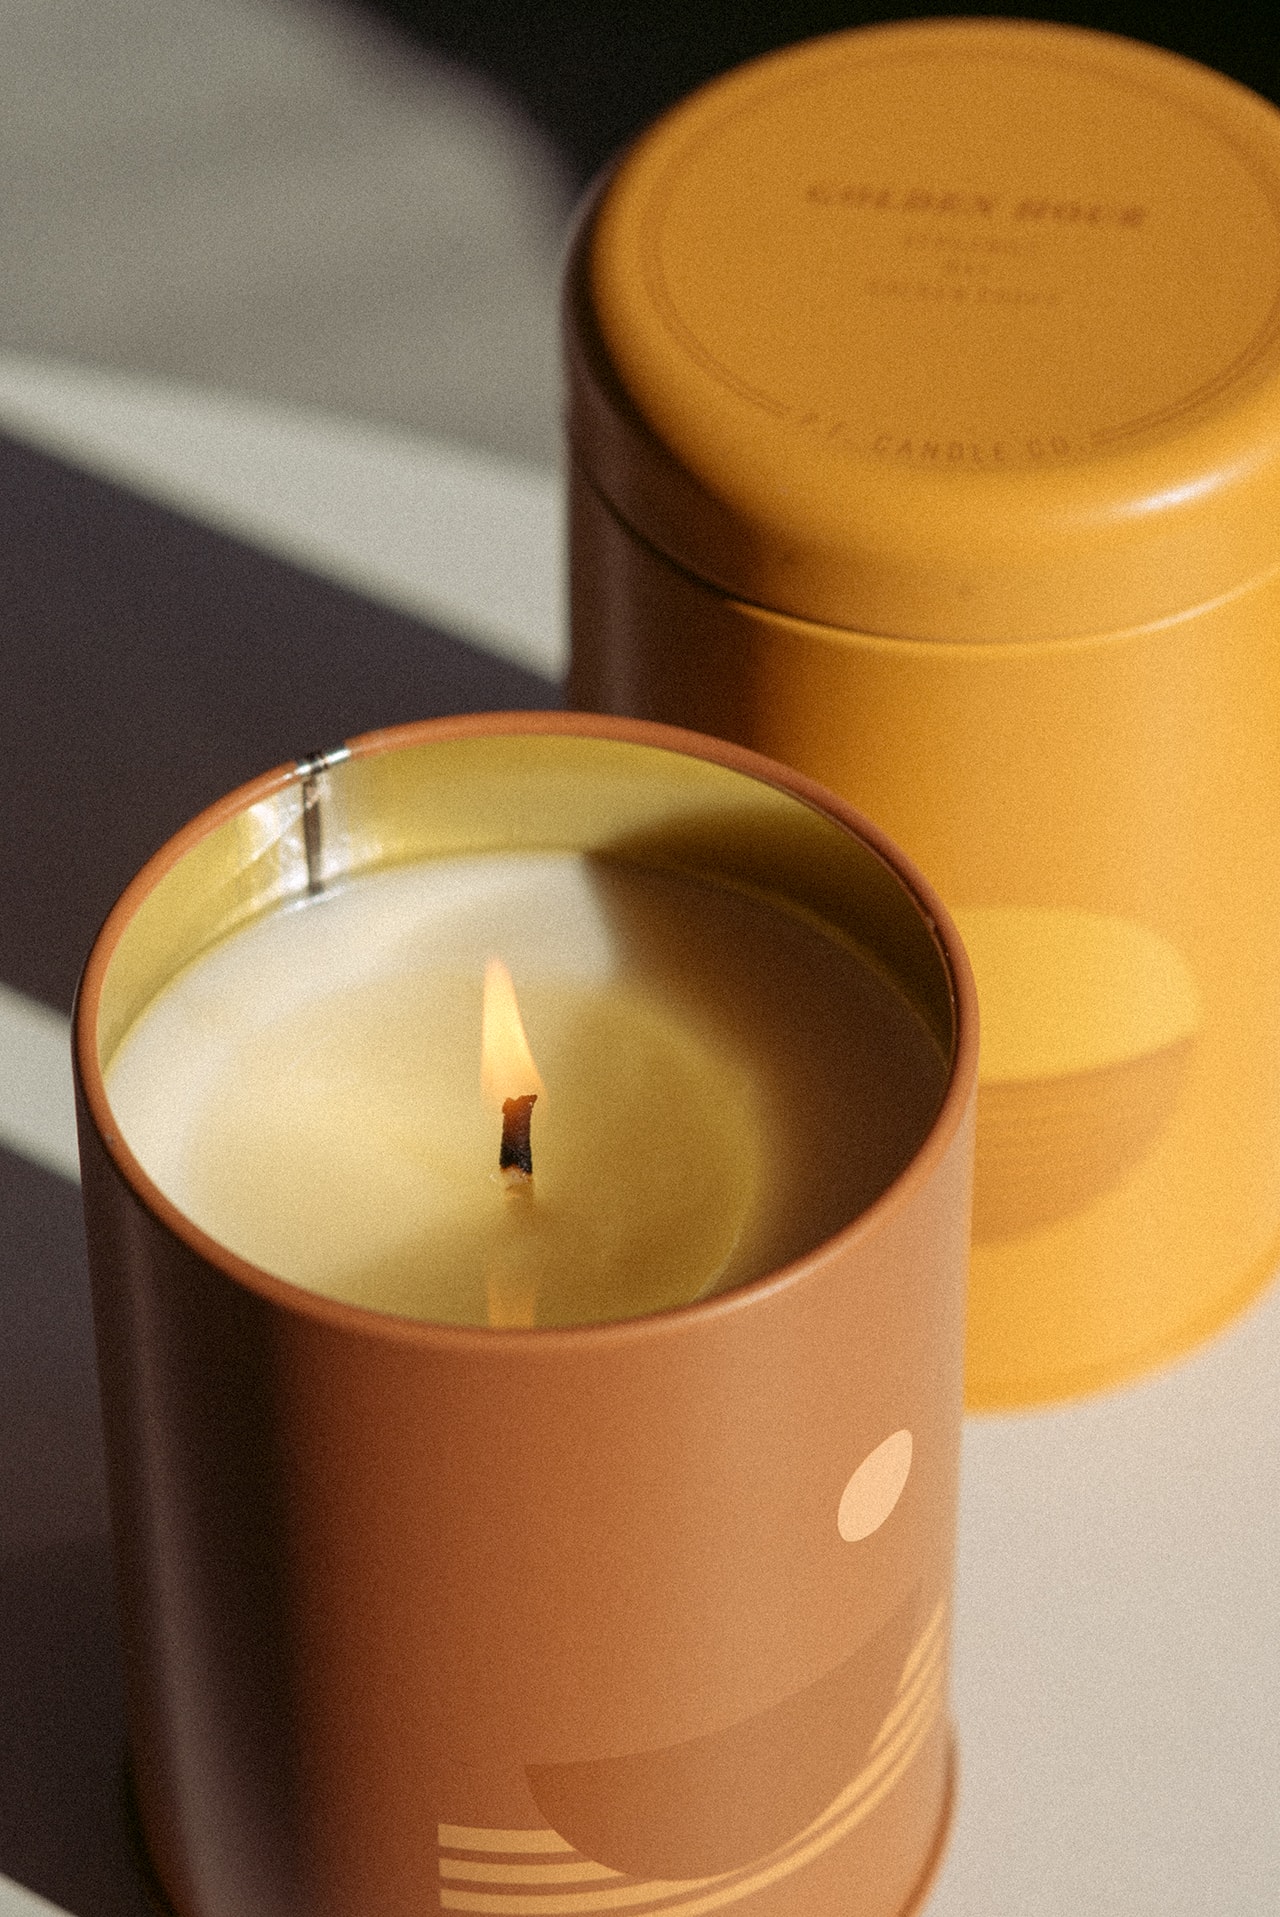 P F Candle Co Swell Sunset Candle Golden Hour